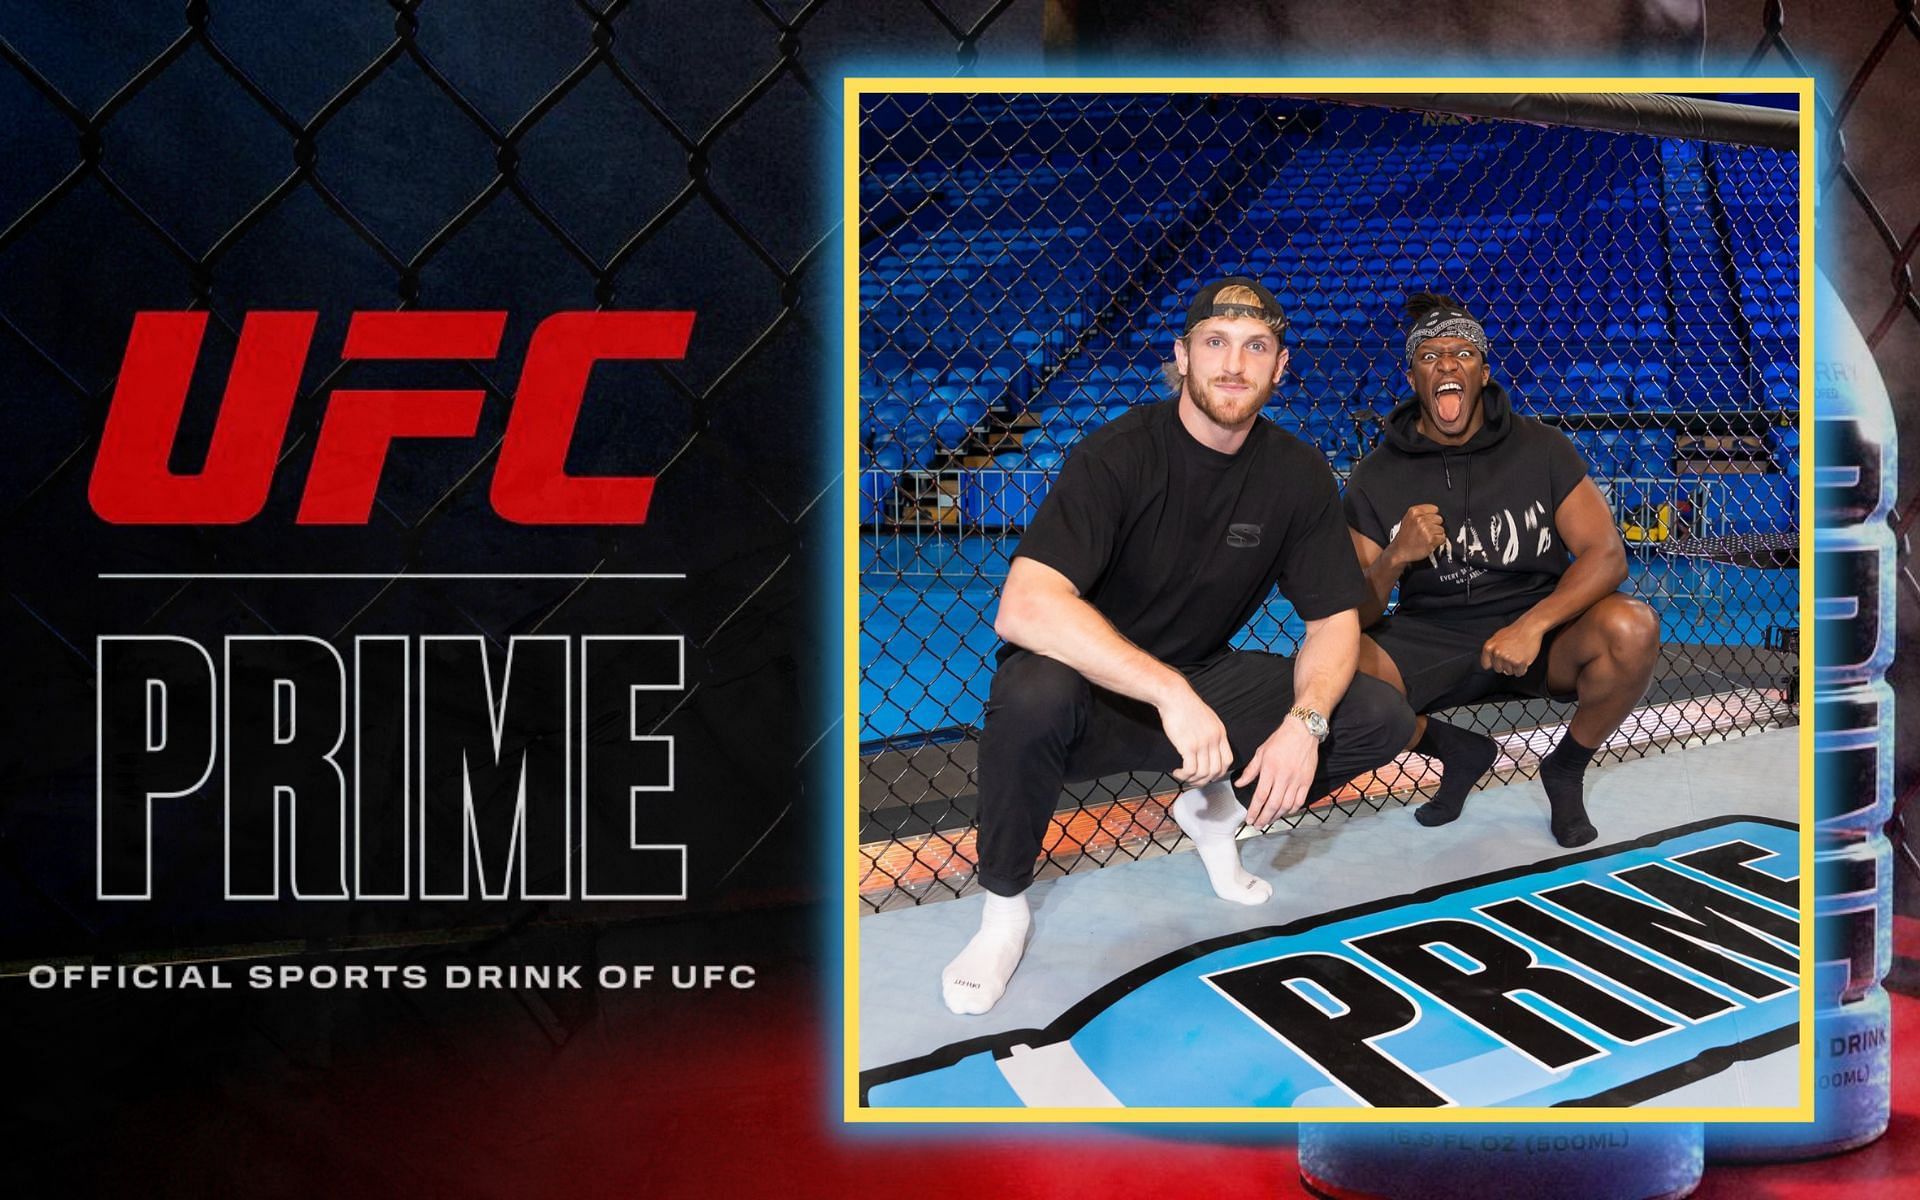 Logan Paul and KSI make PRIME partnership with UFC official at UFC 284 in Perth. [Image credits: @LoganPaul on Twitter; drinkprime.com]